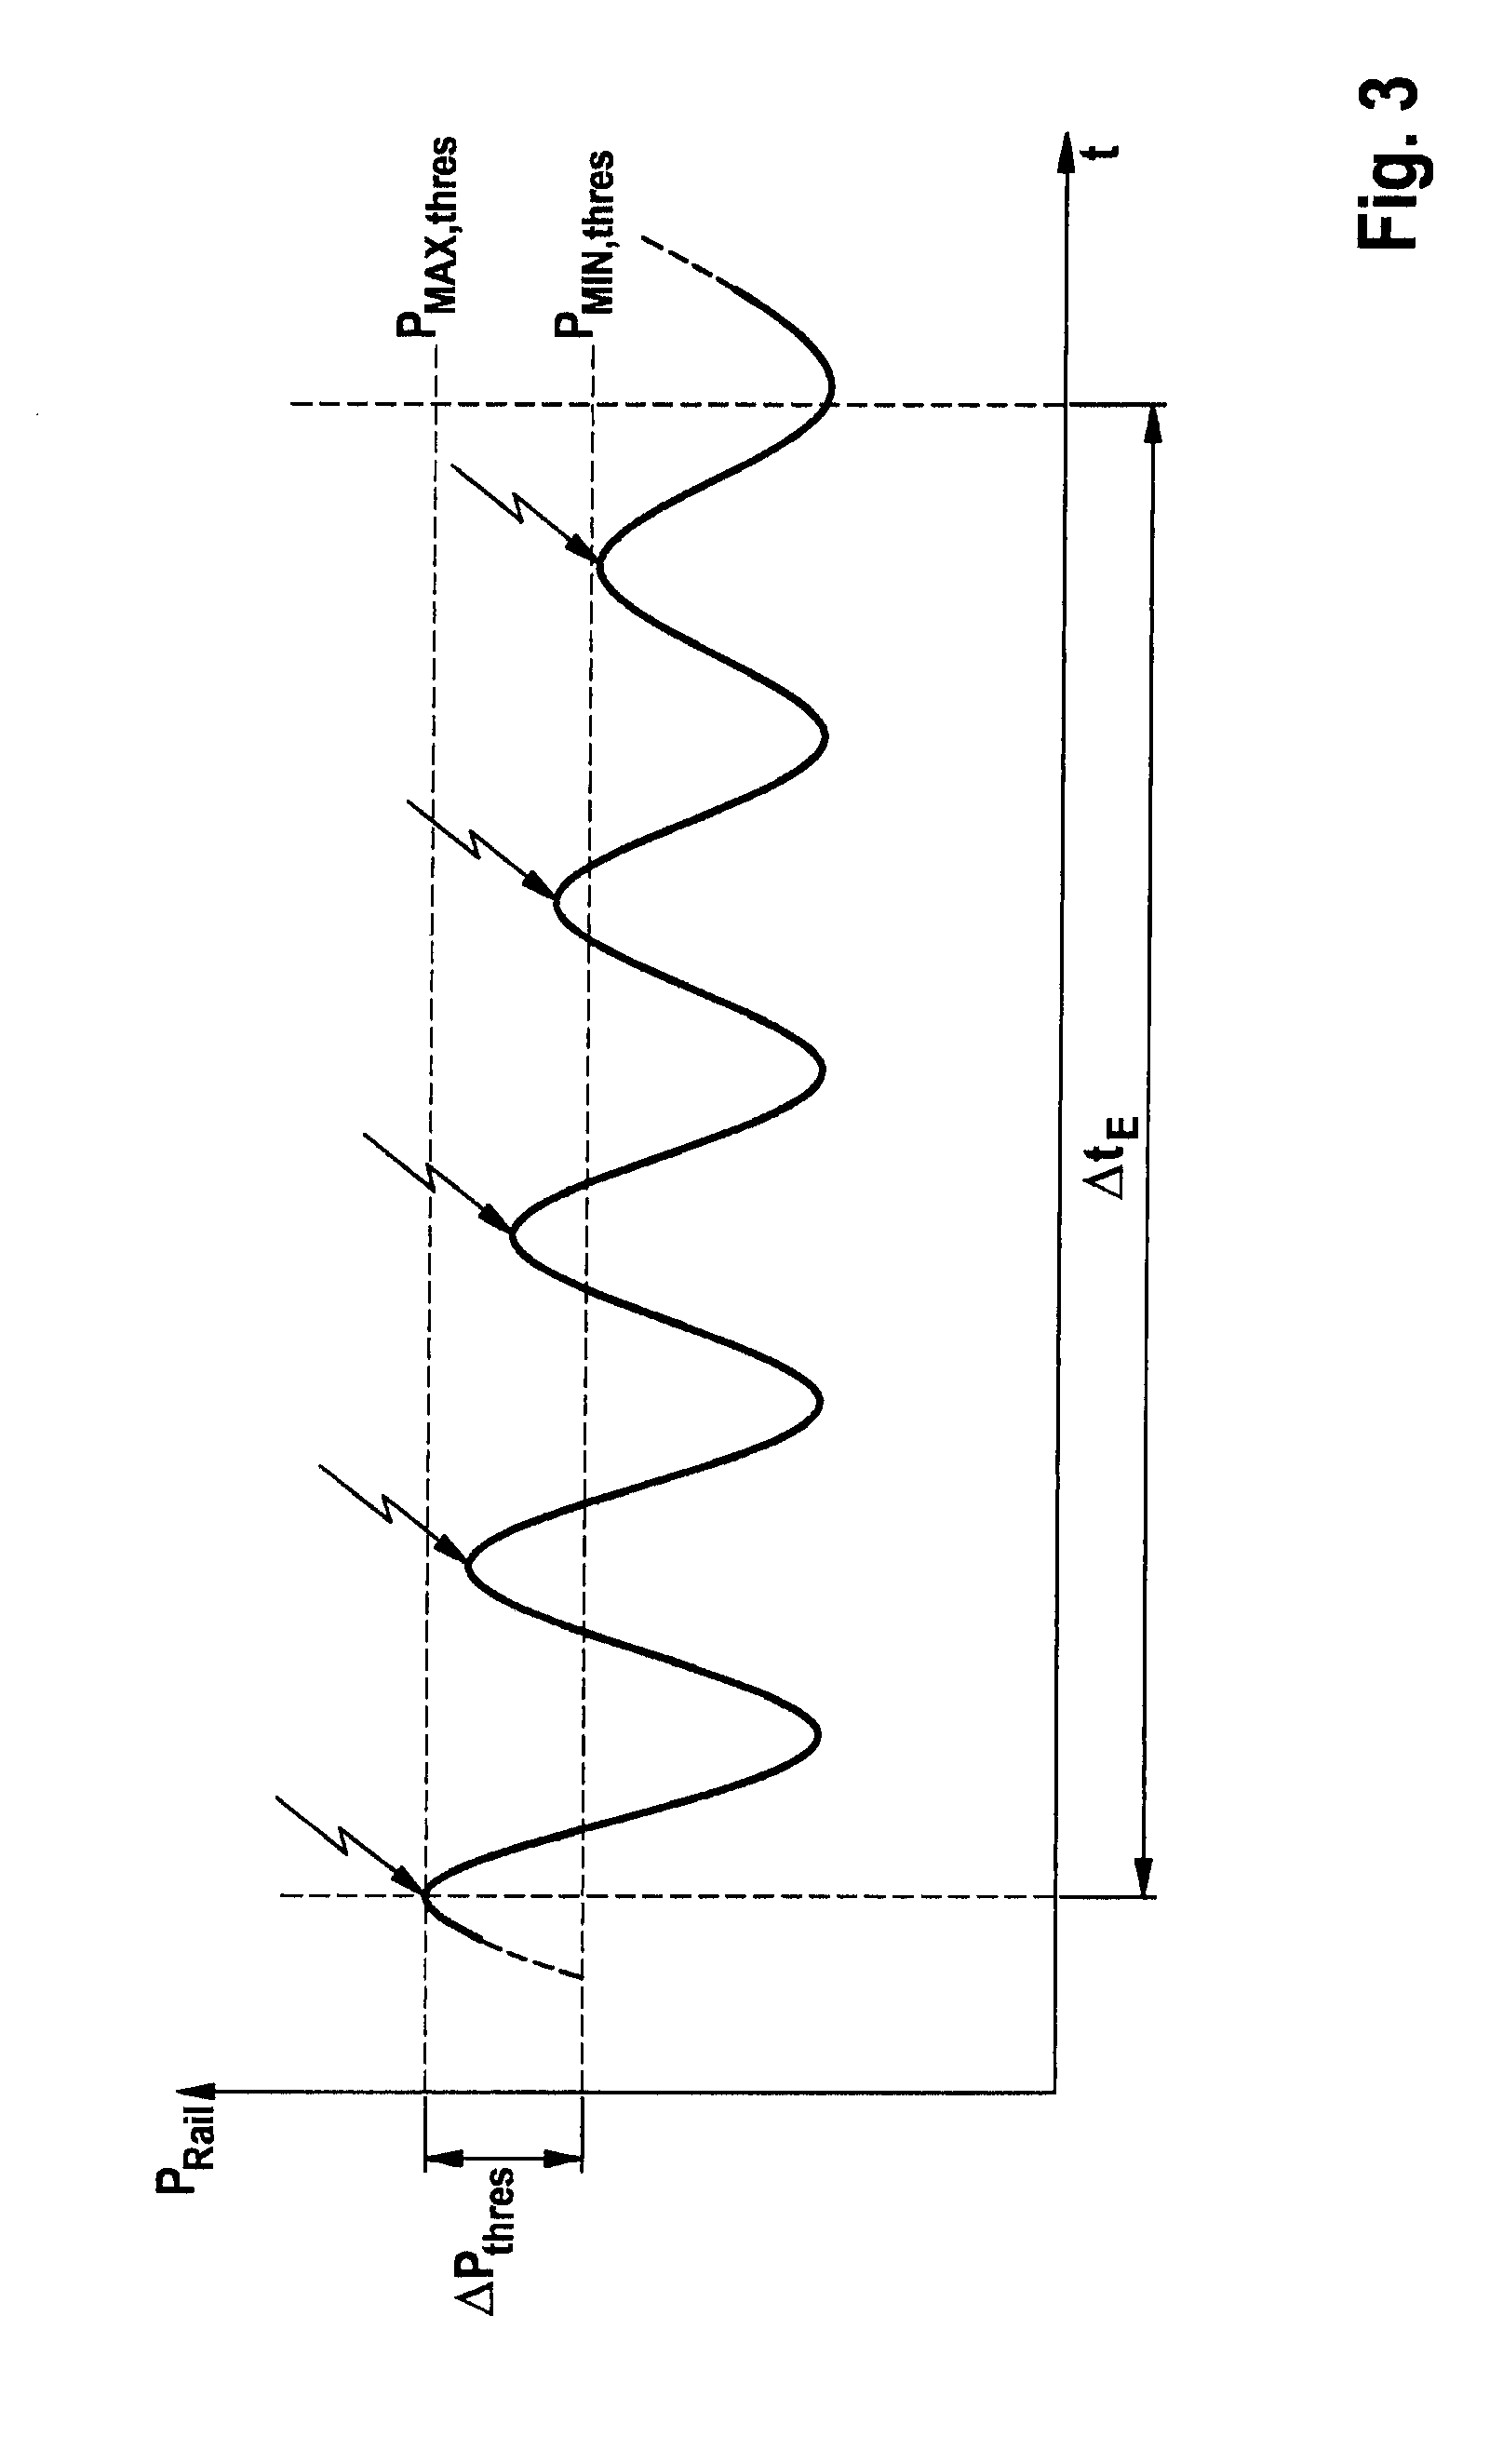 Method and device for operating a fuel injection device, especially of a motor vehicle